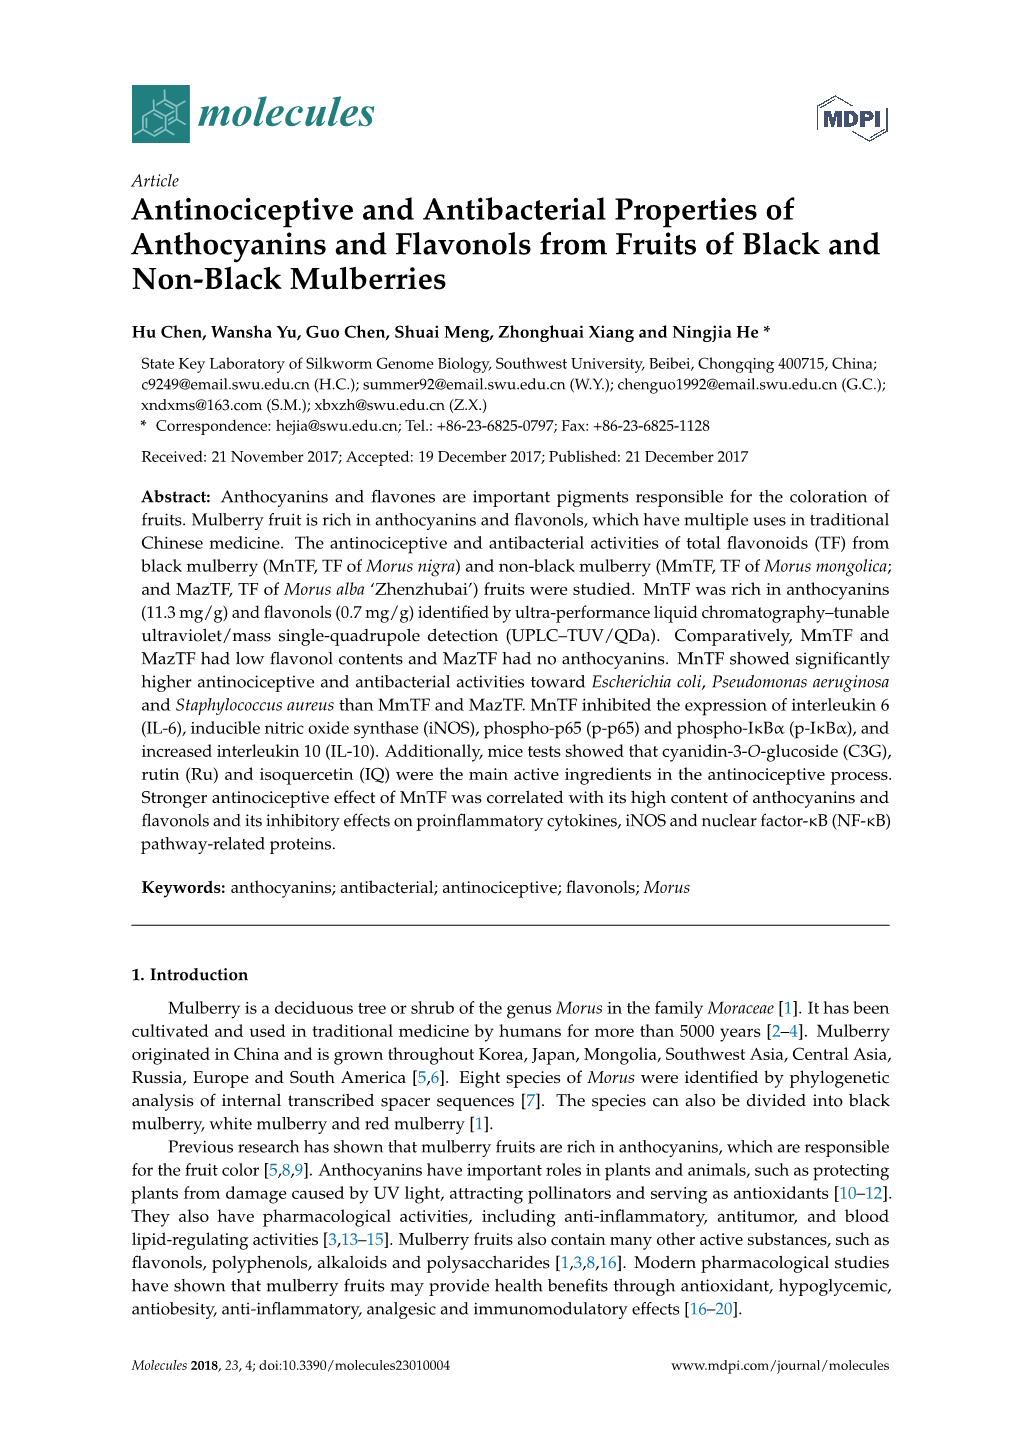 Antinociceptive and Antibacterial Properties of Anthocyanins and Flavonols from Fruits of Black and Non-Black Mulberries